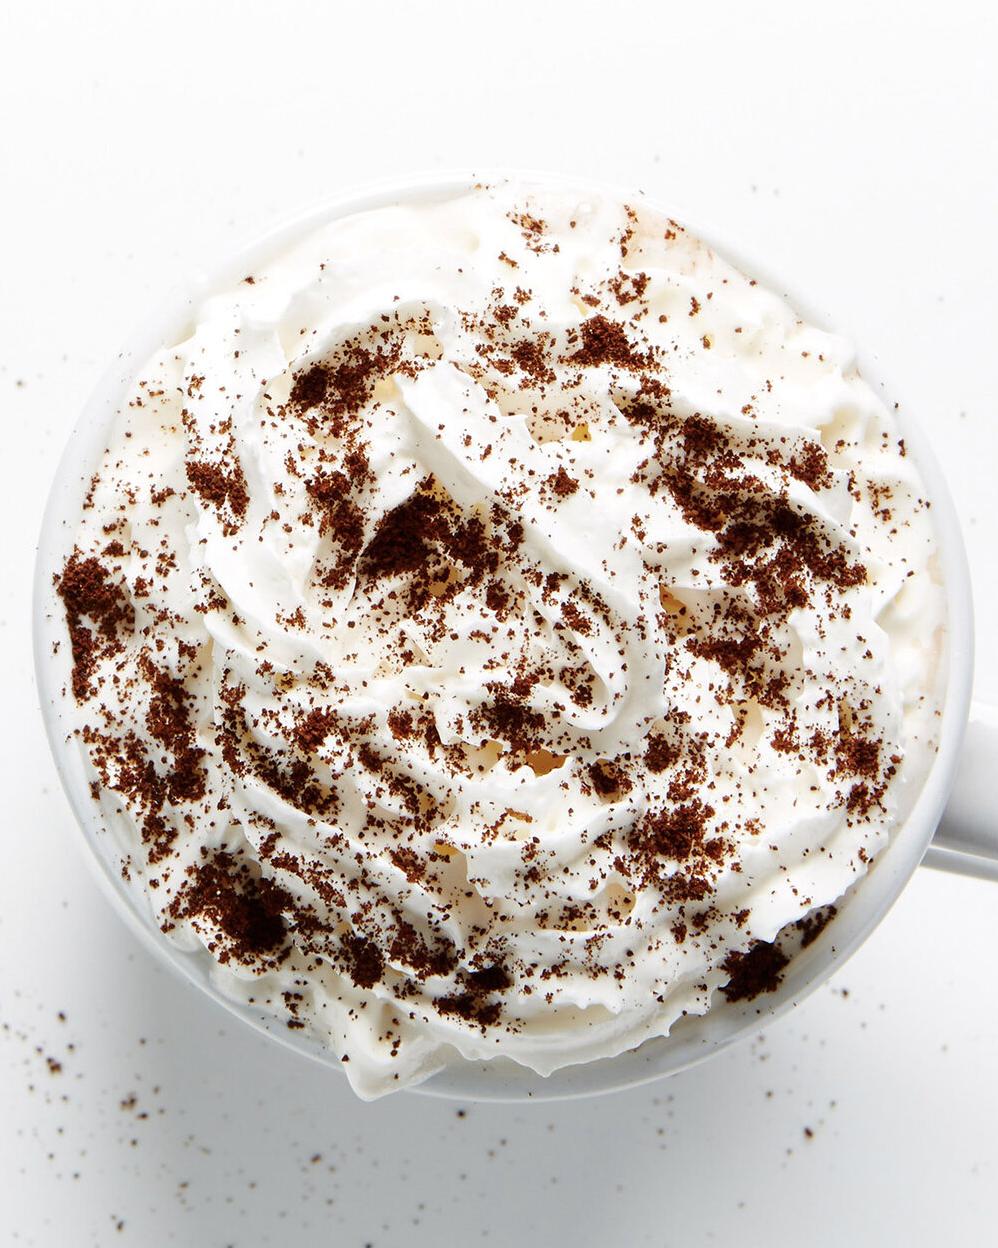  Turn your ordinary hot chocolate into a decadent mocha-soy delight.